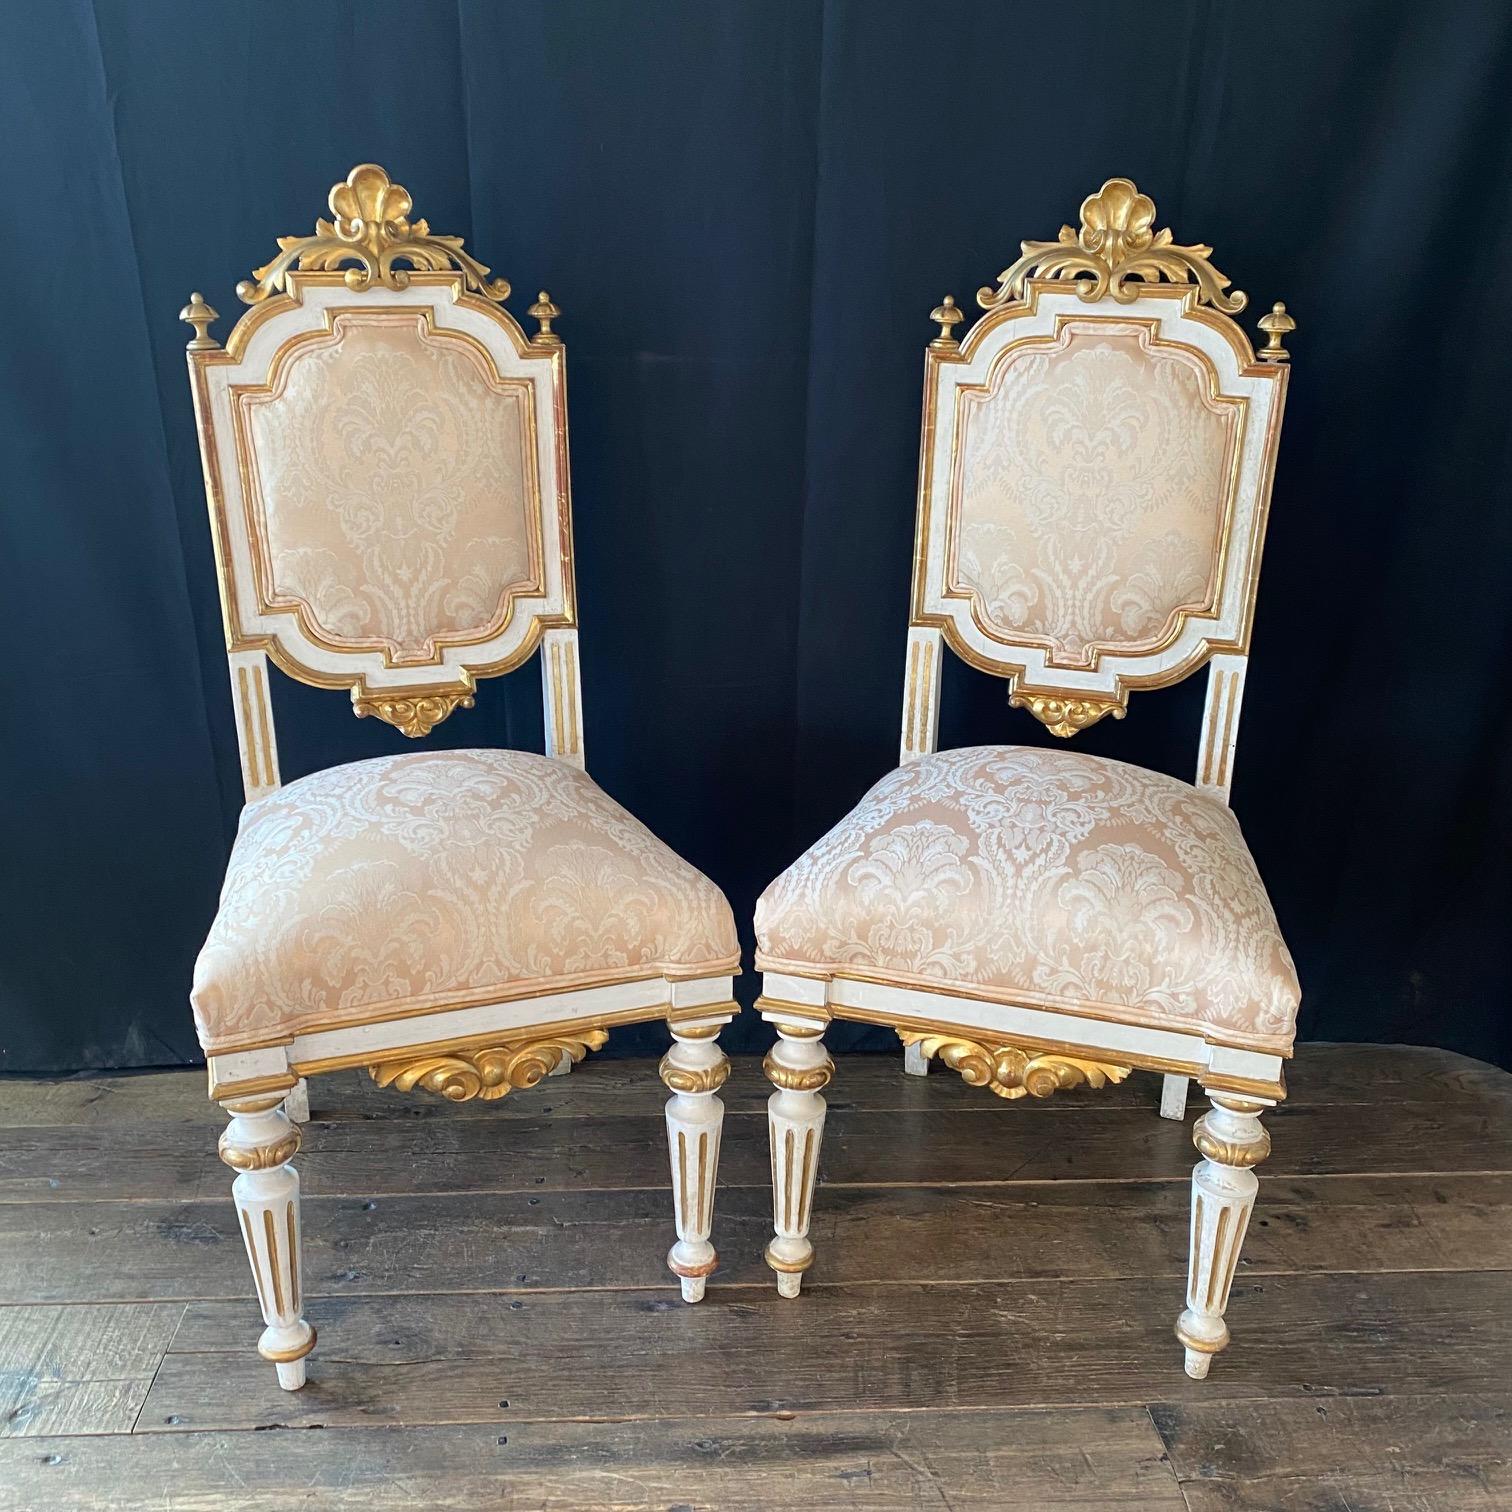 A set of four richly carved Italian, 19th century Venetian side or dining chairs with original rich gold gilt paint. The chairs stand on lovely reeded legs and skirt and seatback display beautifully carved and gilded crests of acanthus leaves and